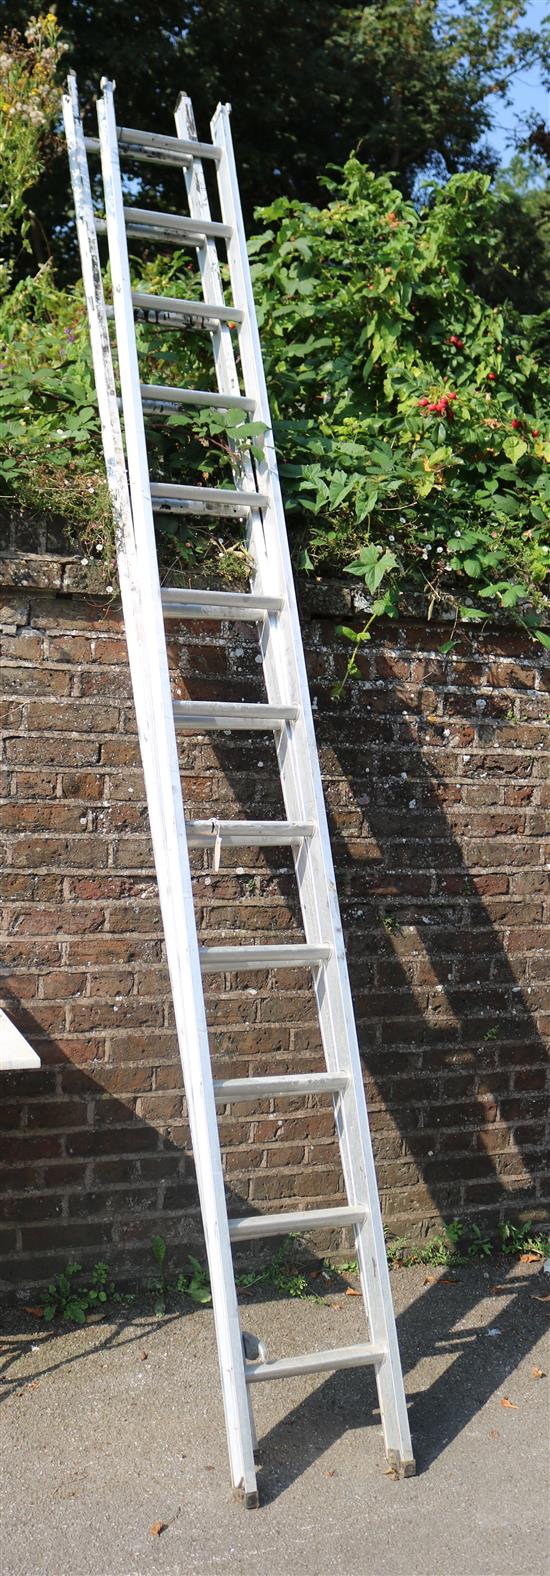 Abro metal 2 section ladder